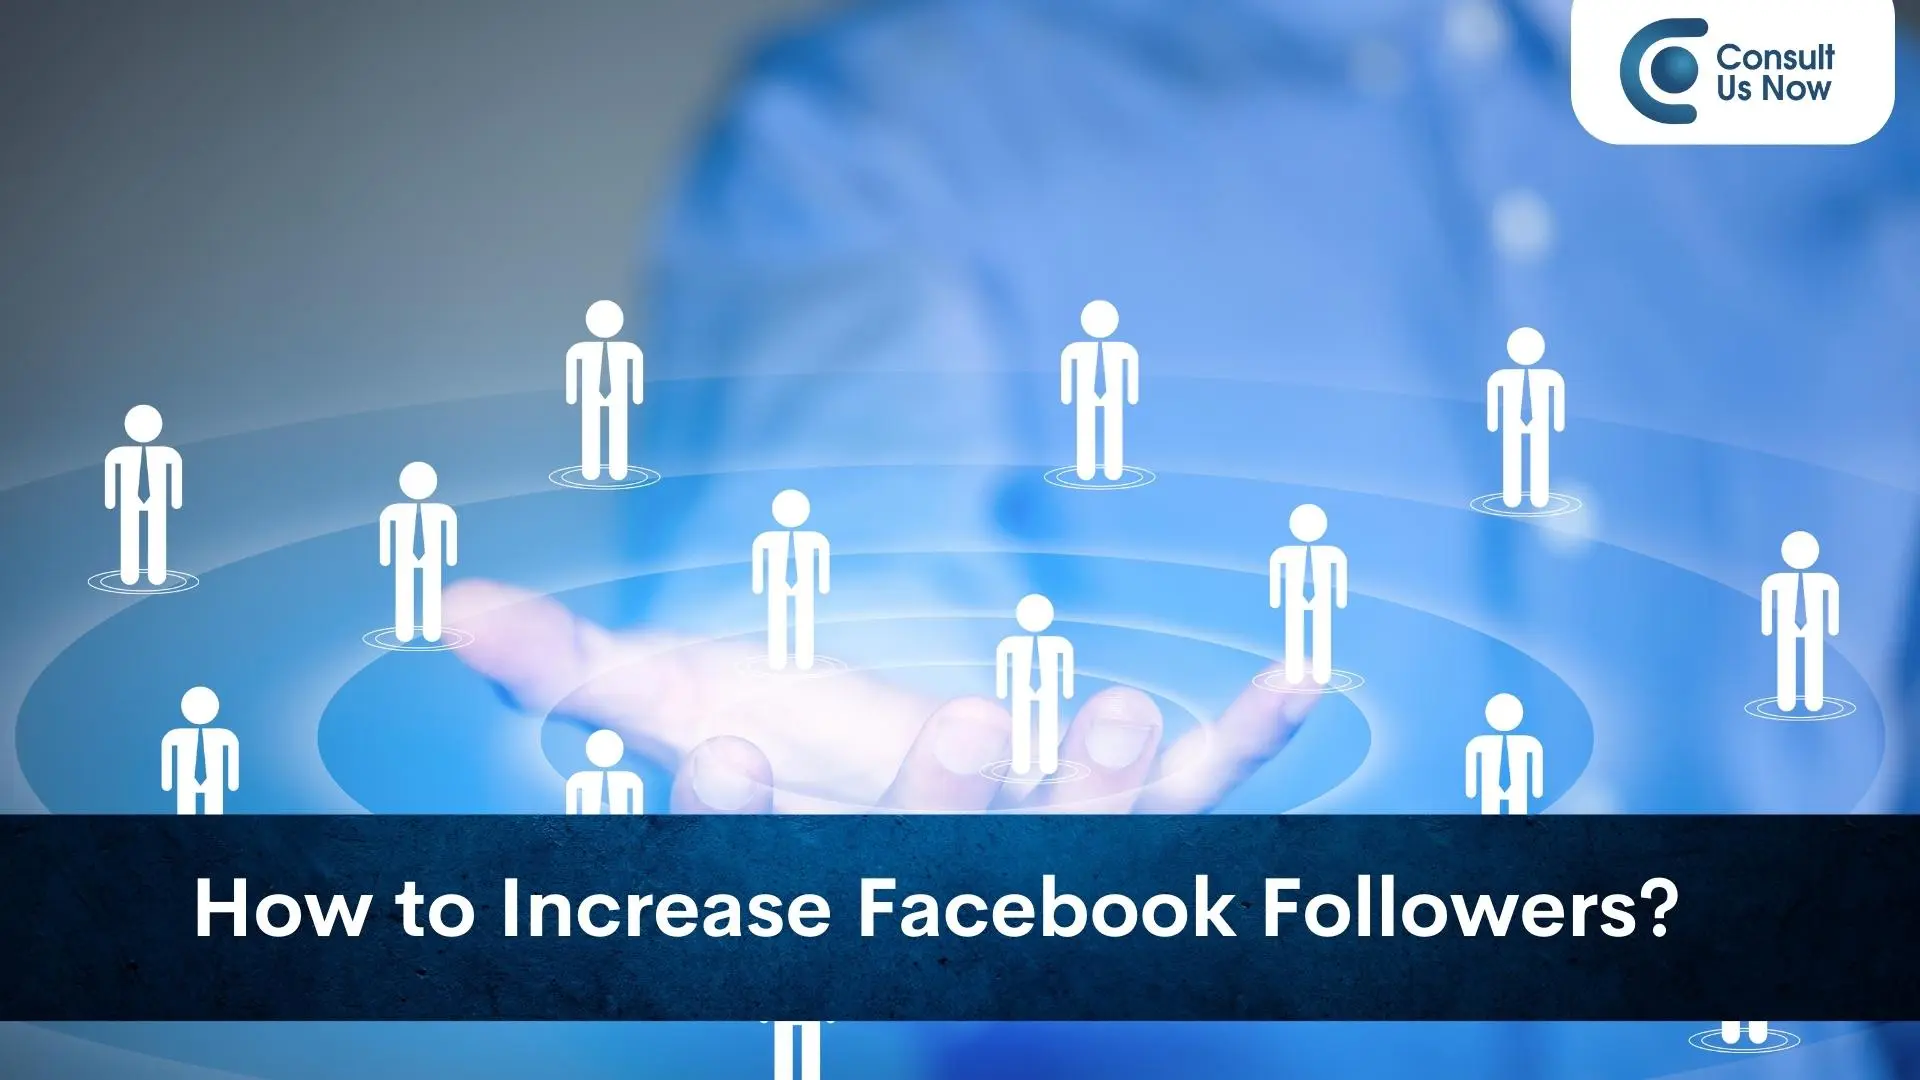 How to Increase Facebook Followers?